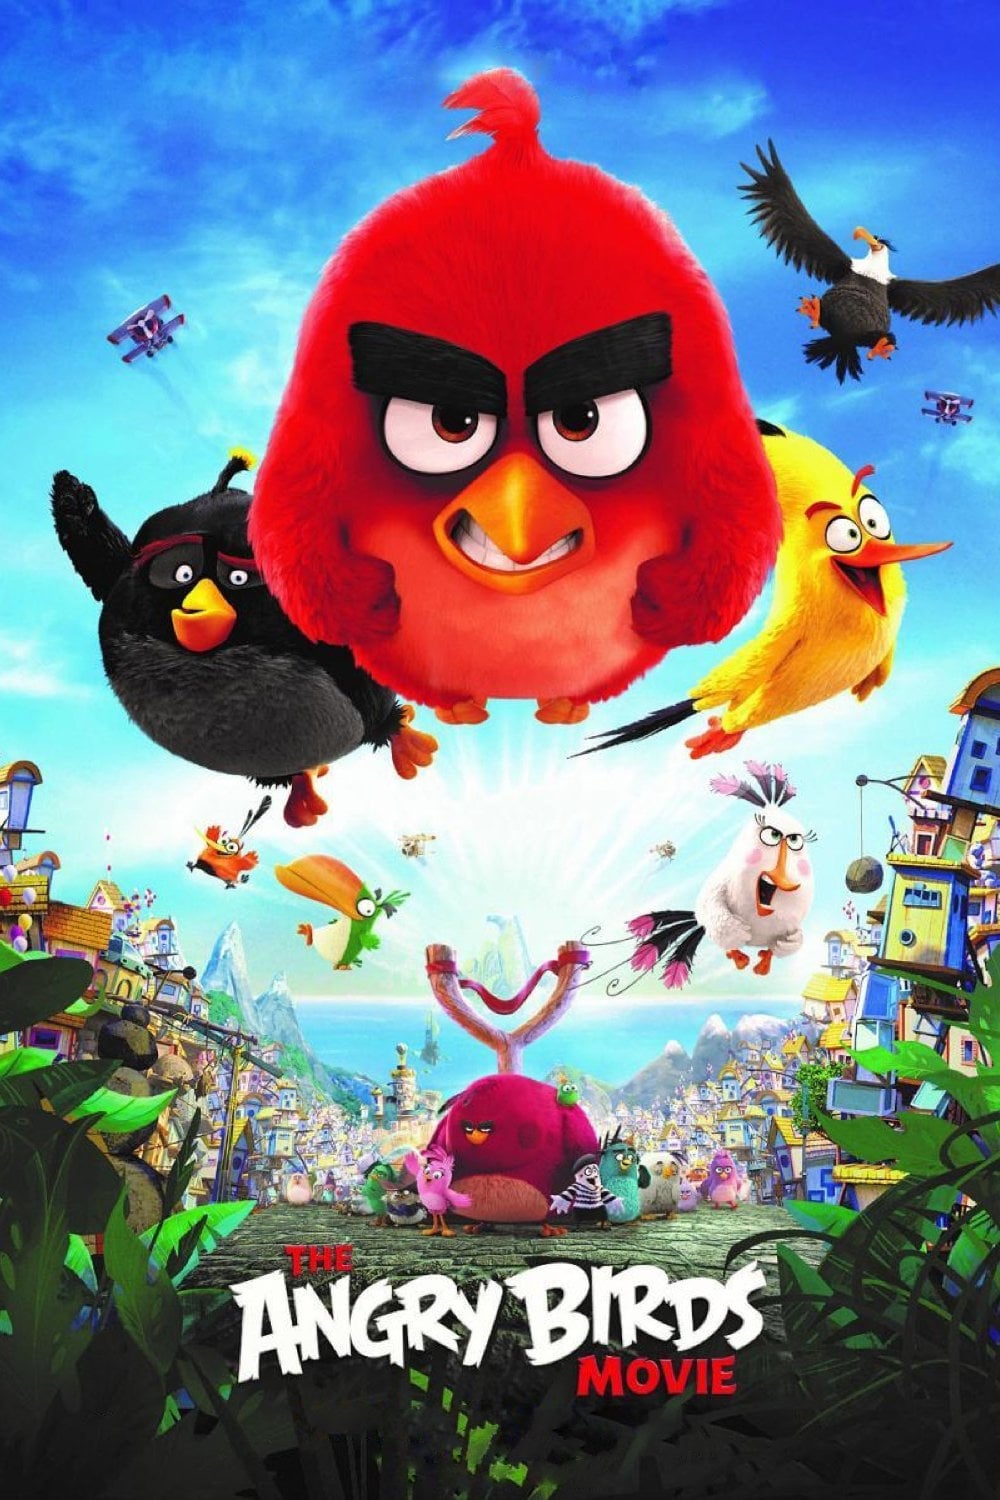 Download The.Angry.Birds.Movie.2016.1080p.3D.BluRay.Half-SBS.x264.DTS